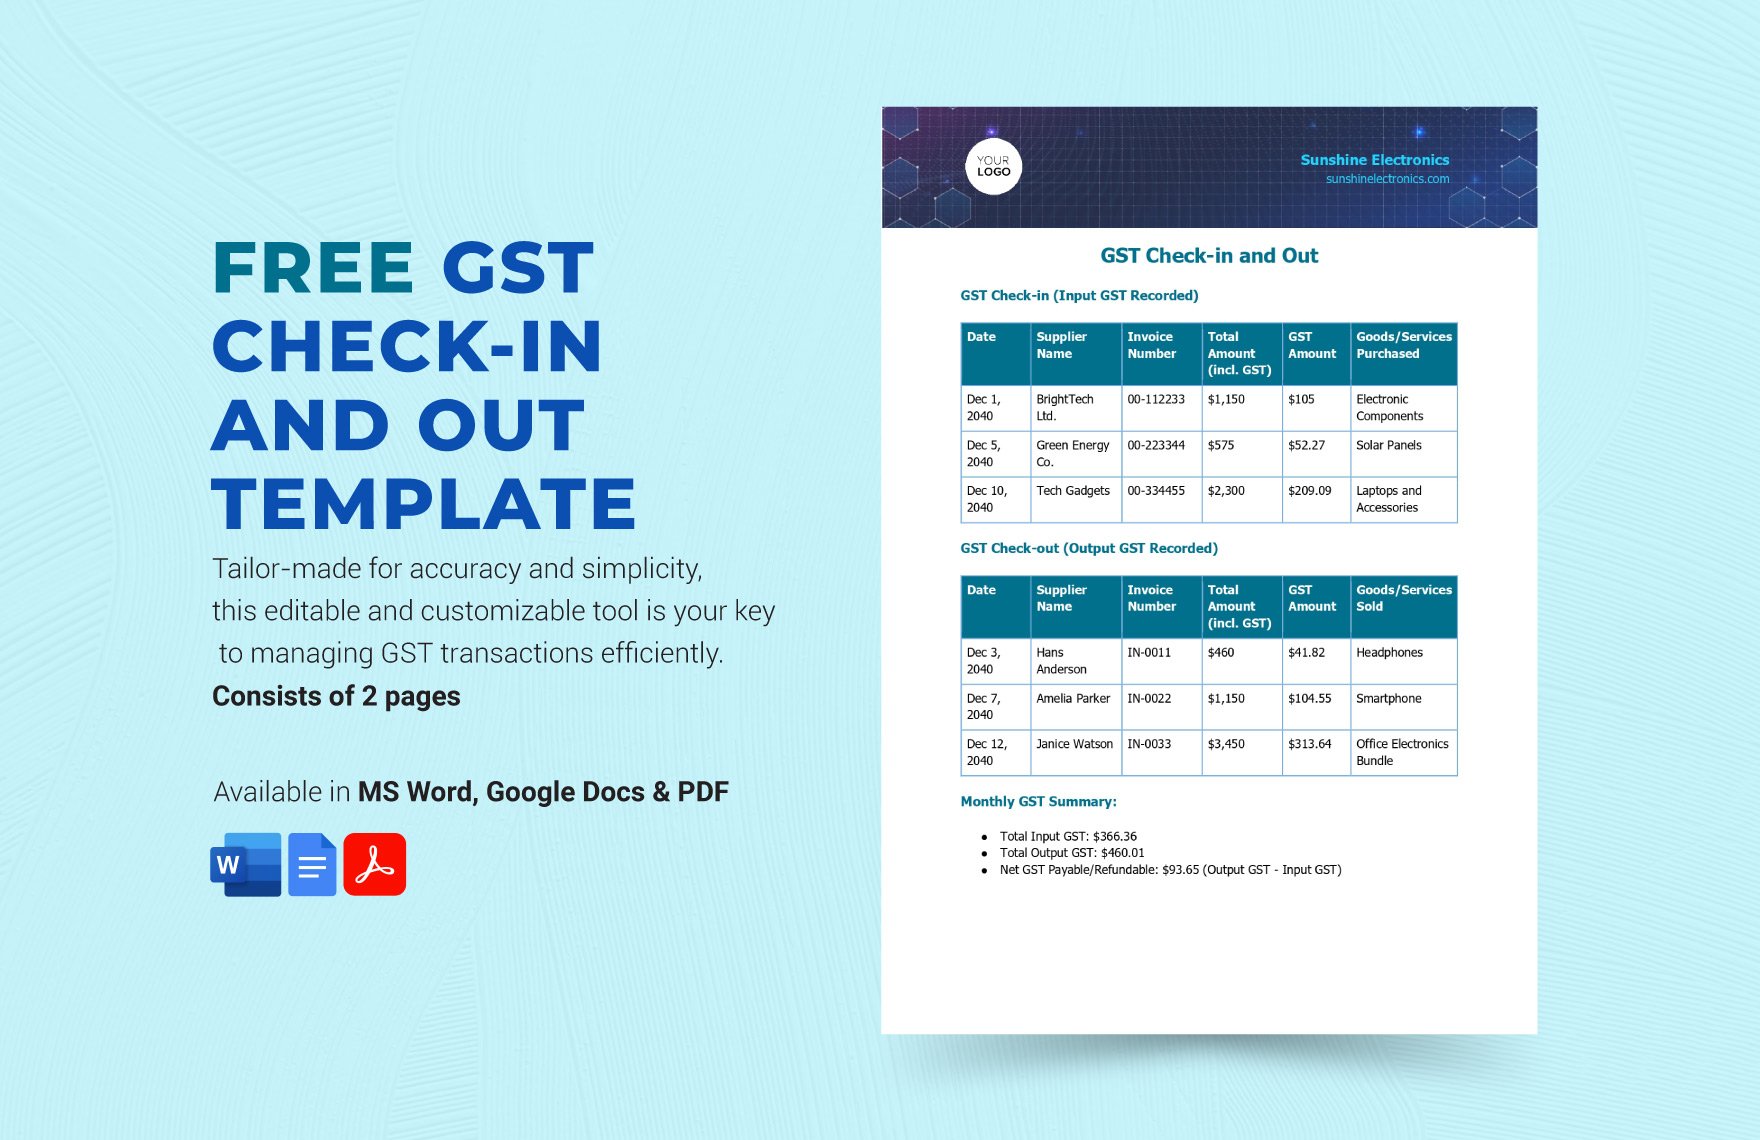 GST Check-in and Out Template